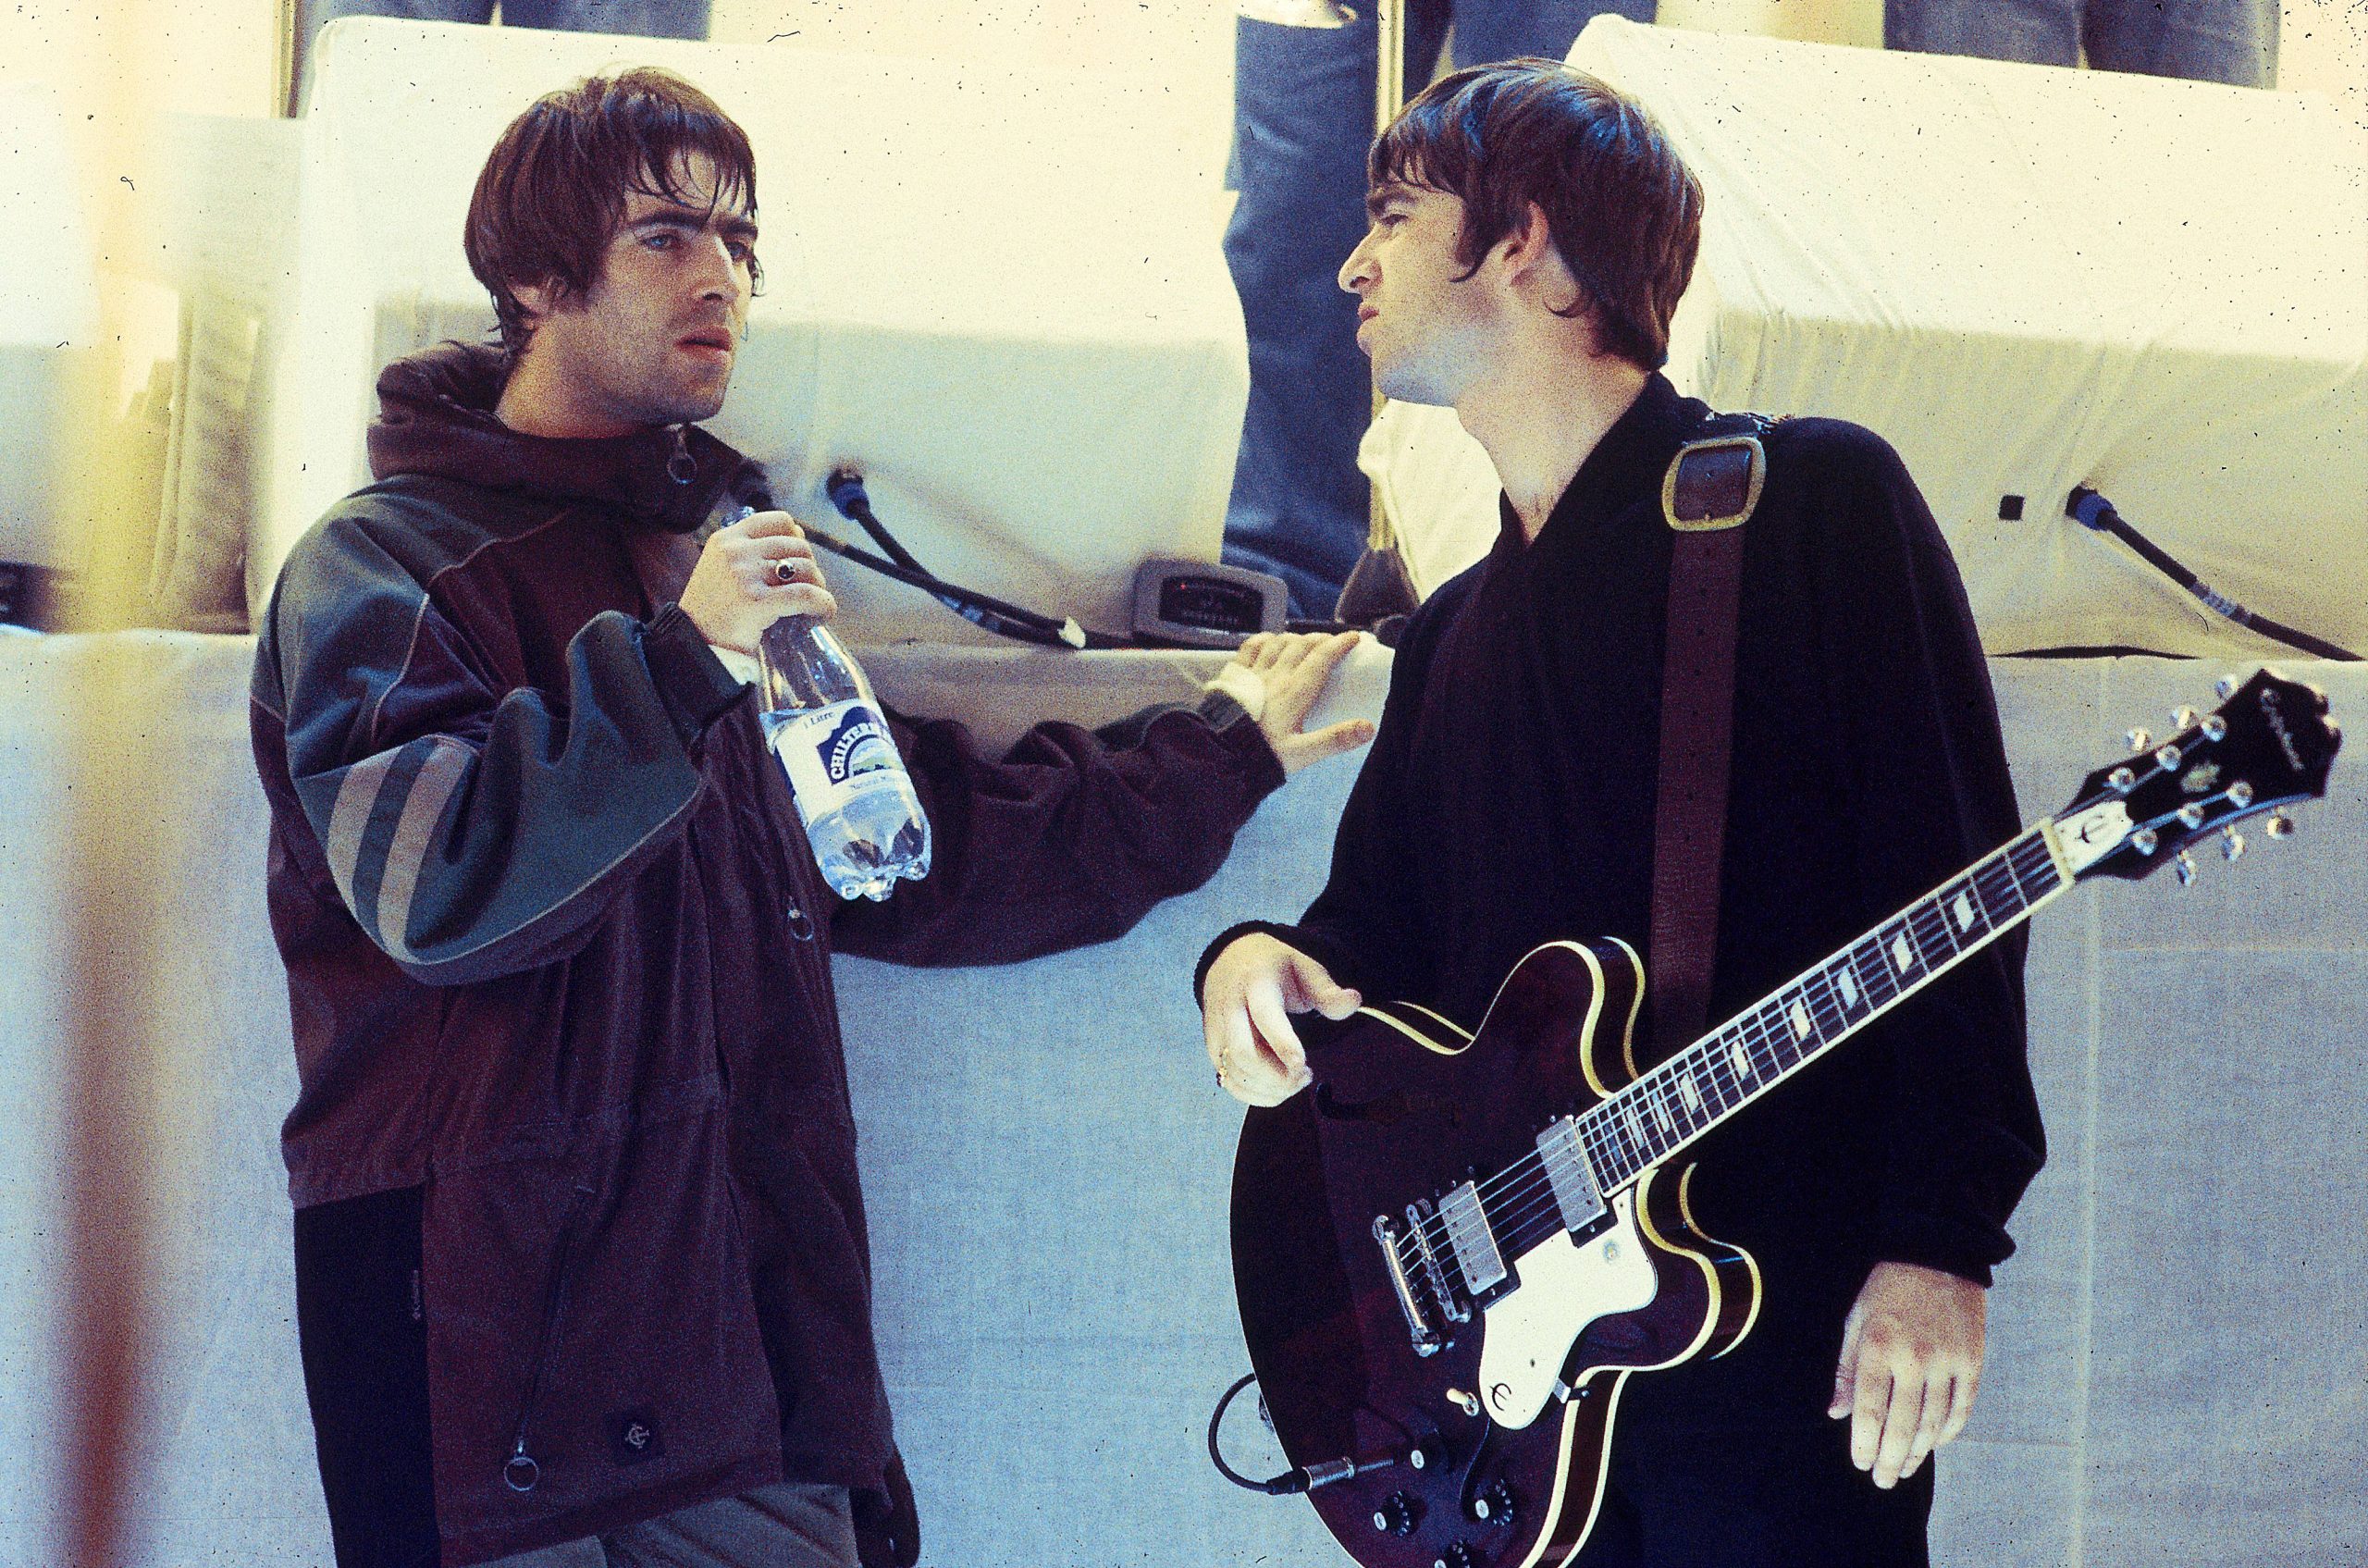 Noelle and Liam Gallagher working on a documentary on Knebworth's oasis shows